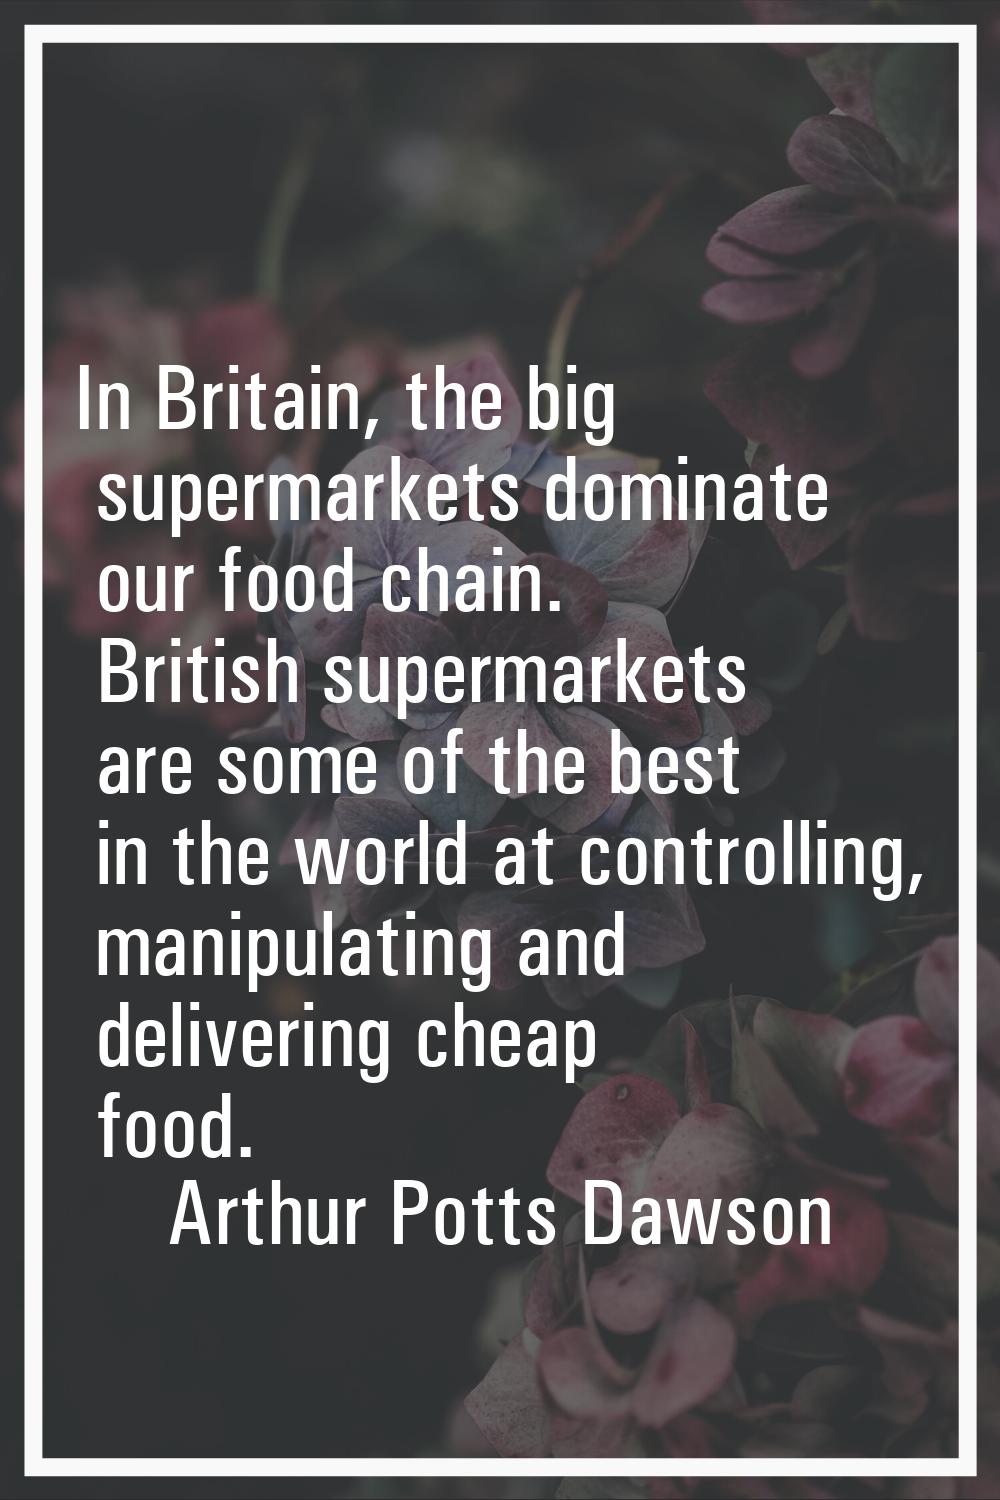 In Britain, the big supermarkets dominate our food chain. British supermarkets are some of the best